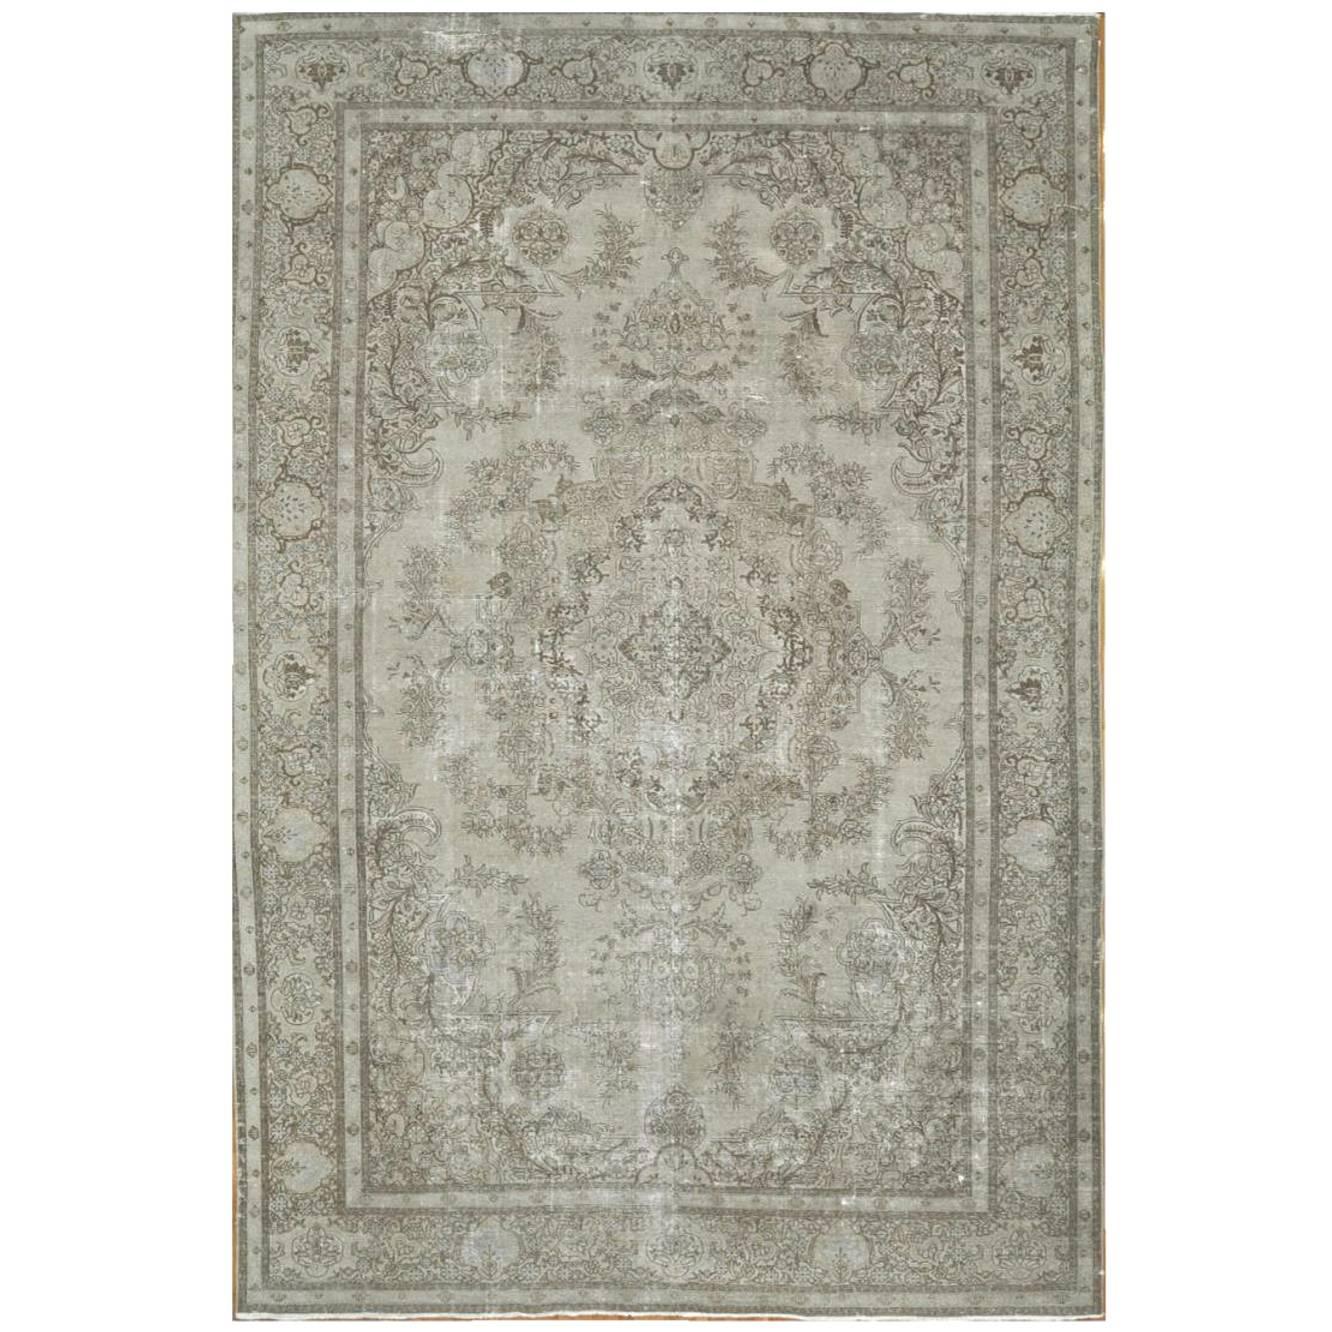 Large Antique Hand-Knotted Distressed Persian Tabriz Rug 